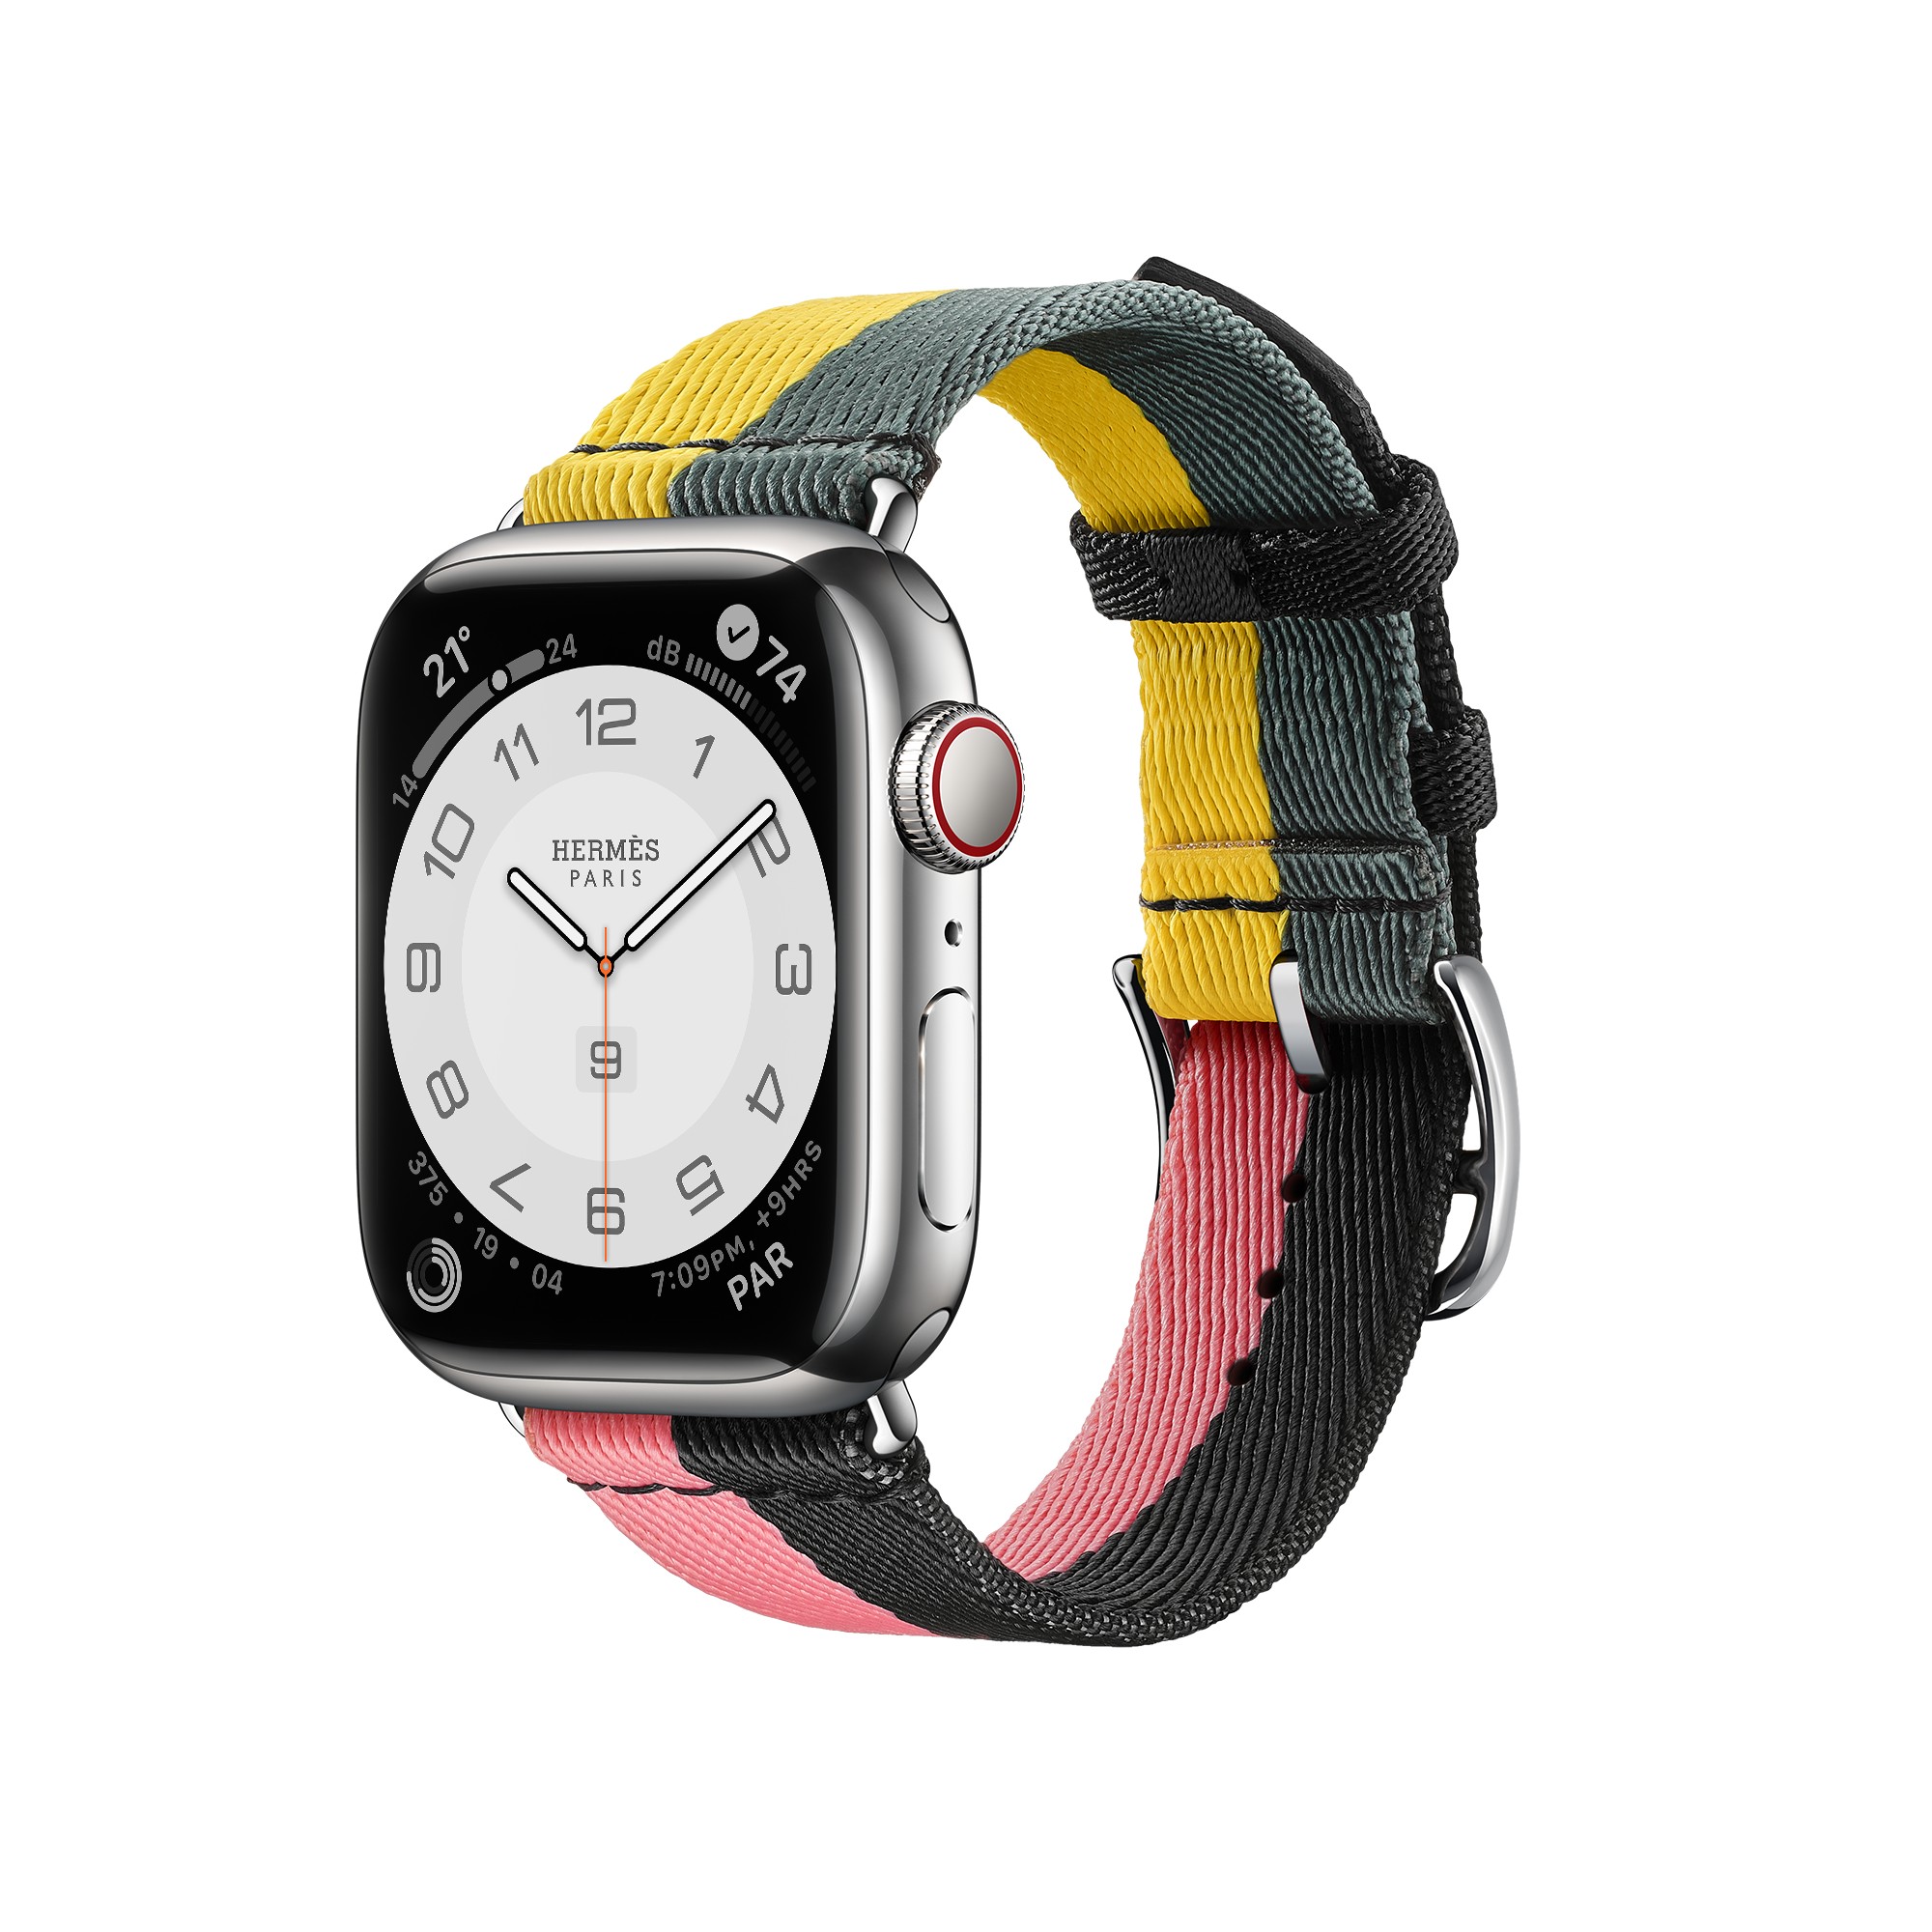 Apple Watch and Hermès release a colorful watch series - Numéro Netherlands